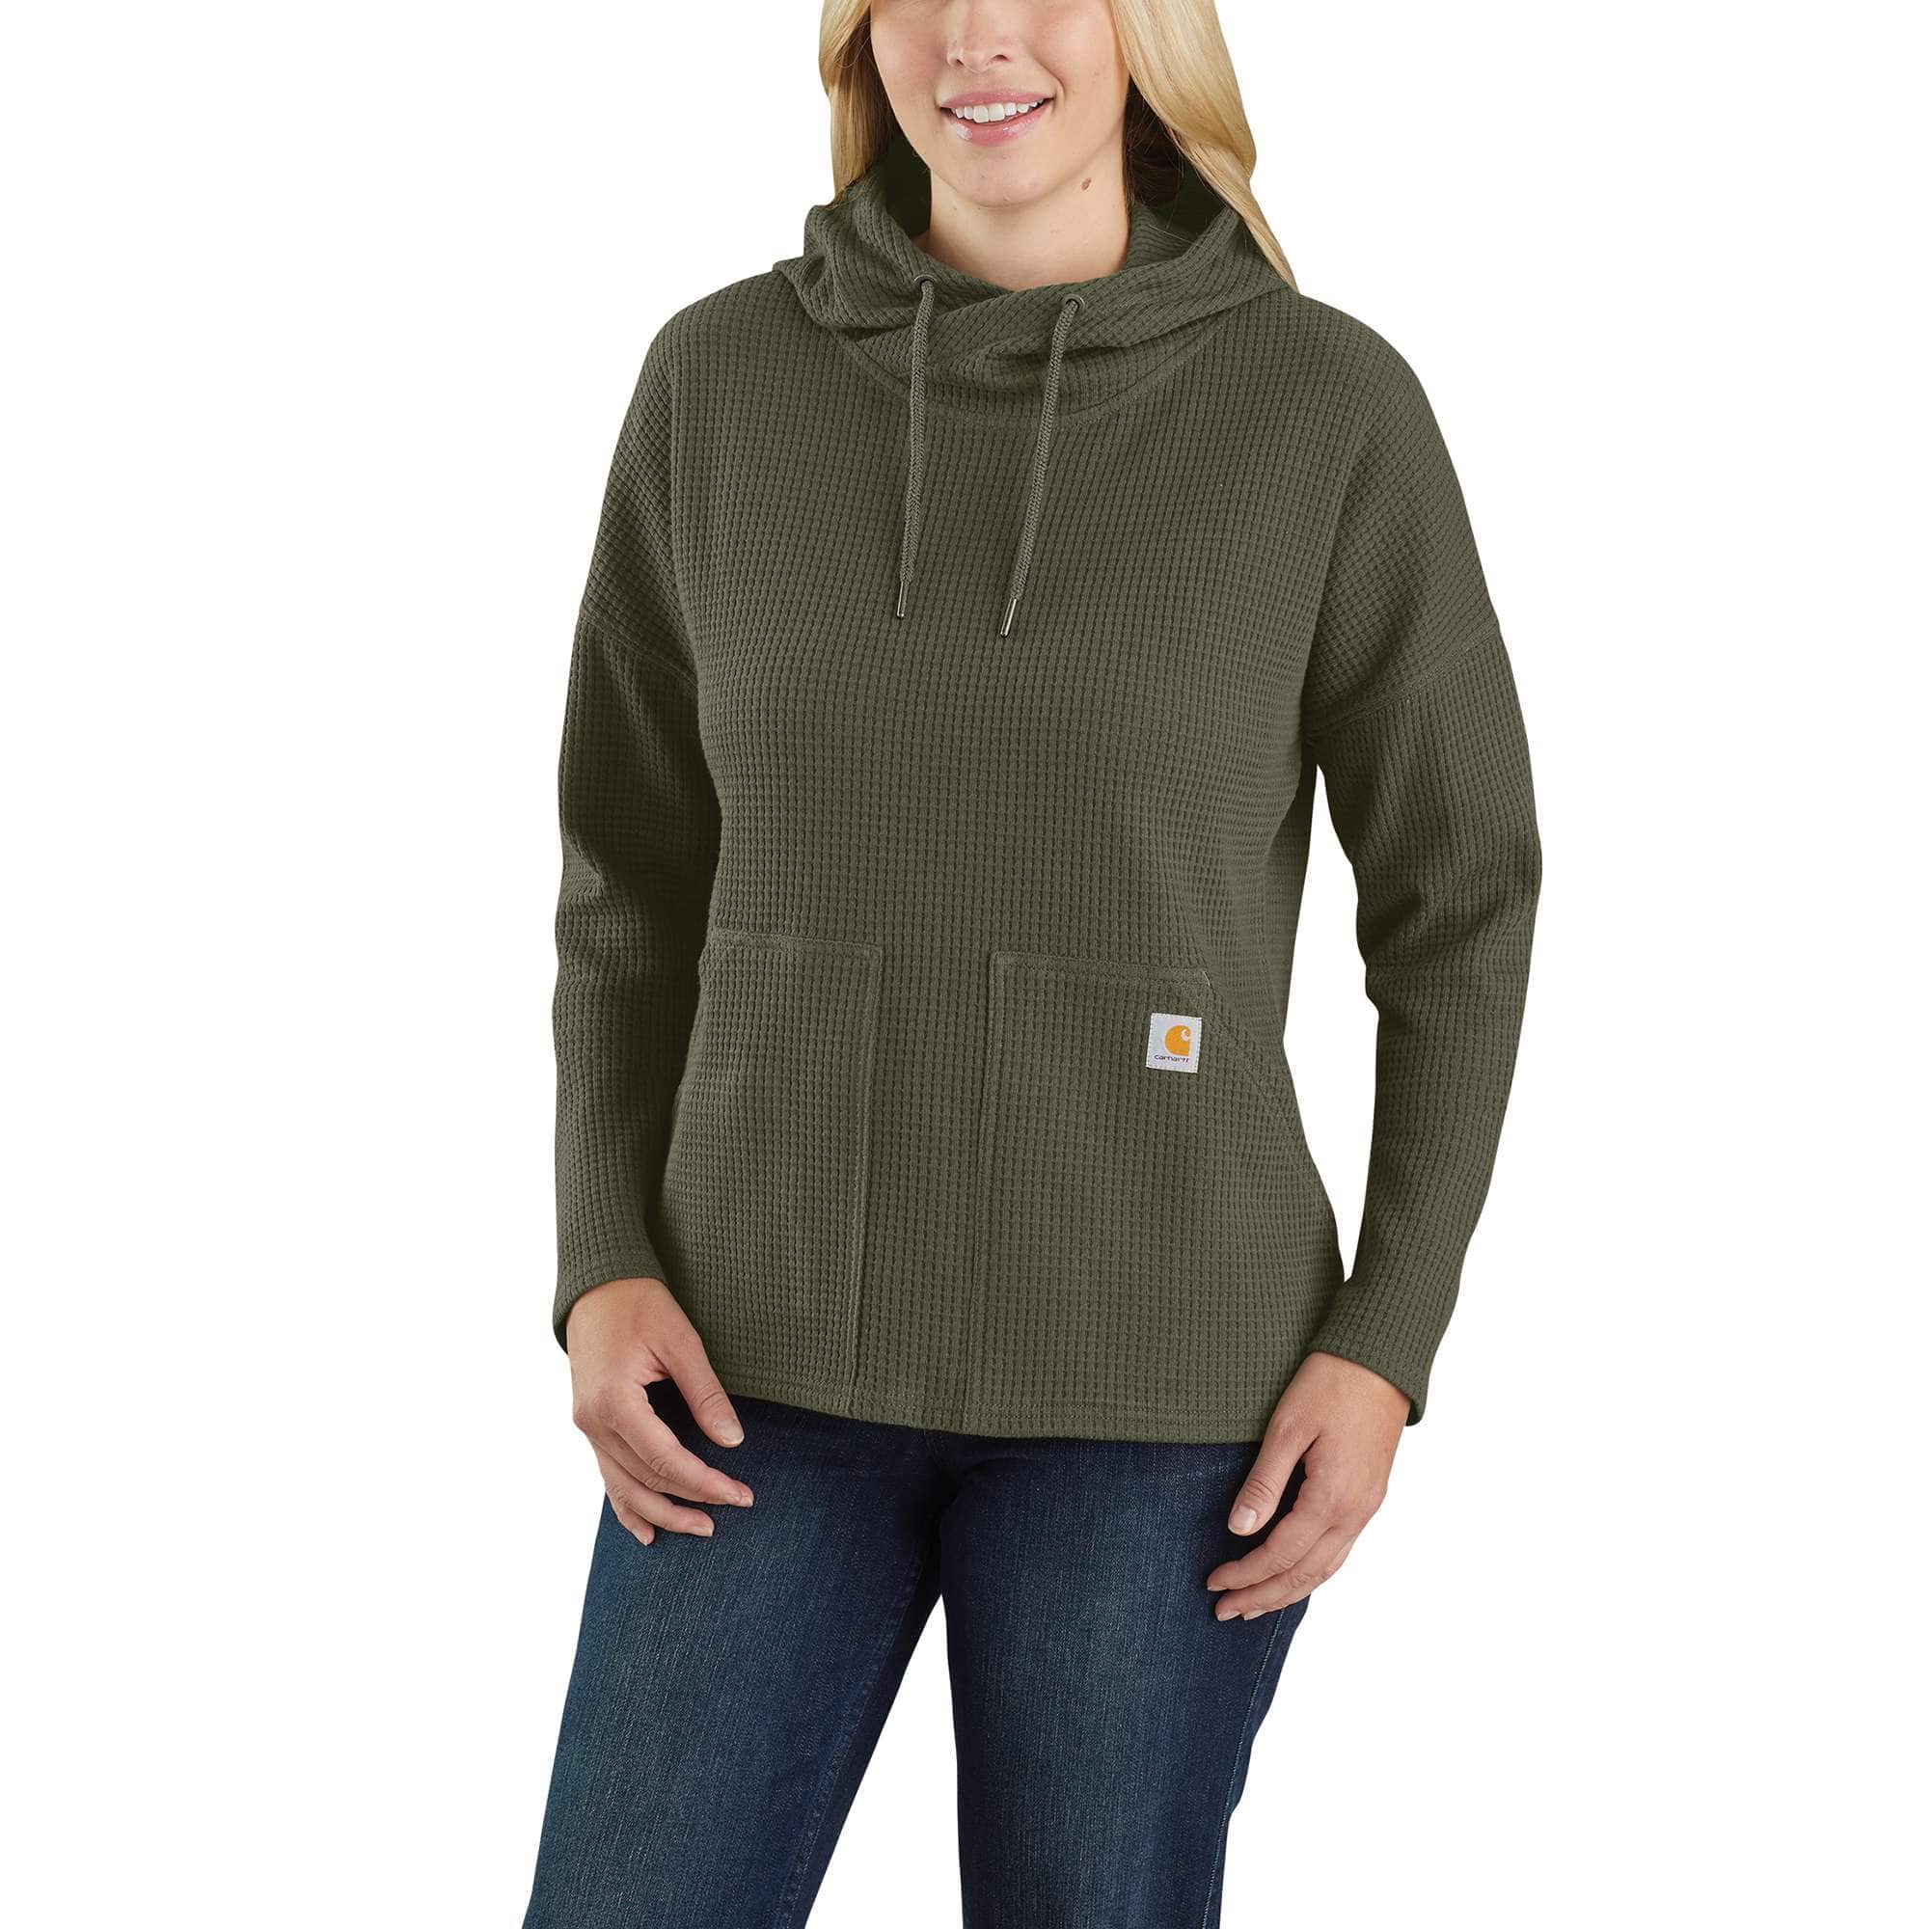 Carhartt Women's Relaxed Fit Heavyweight Long-Sleeve Hooded Thermal Shirt 